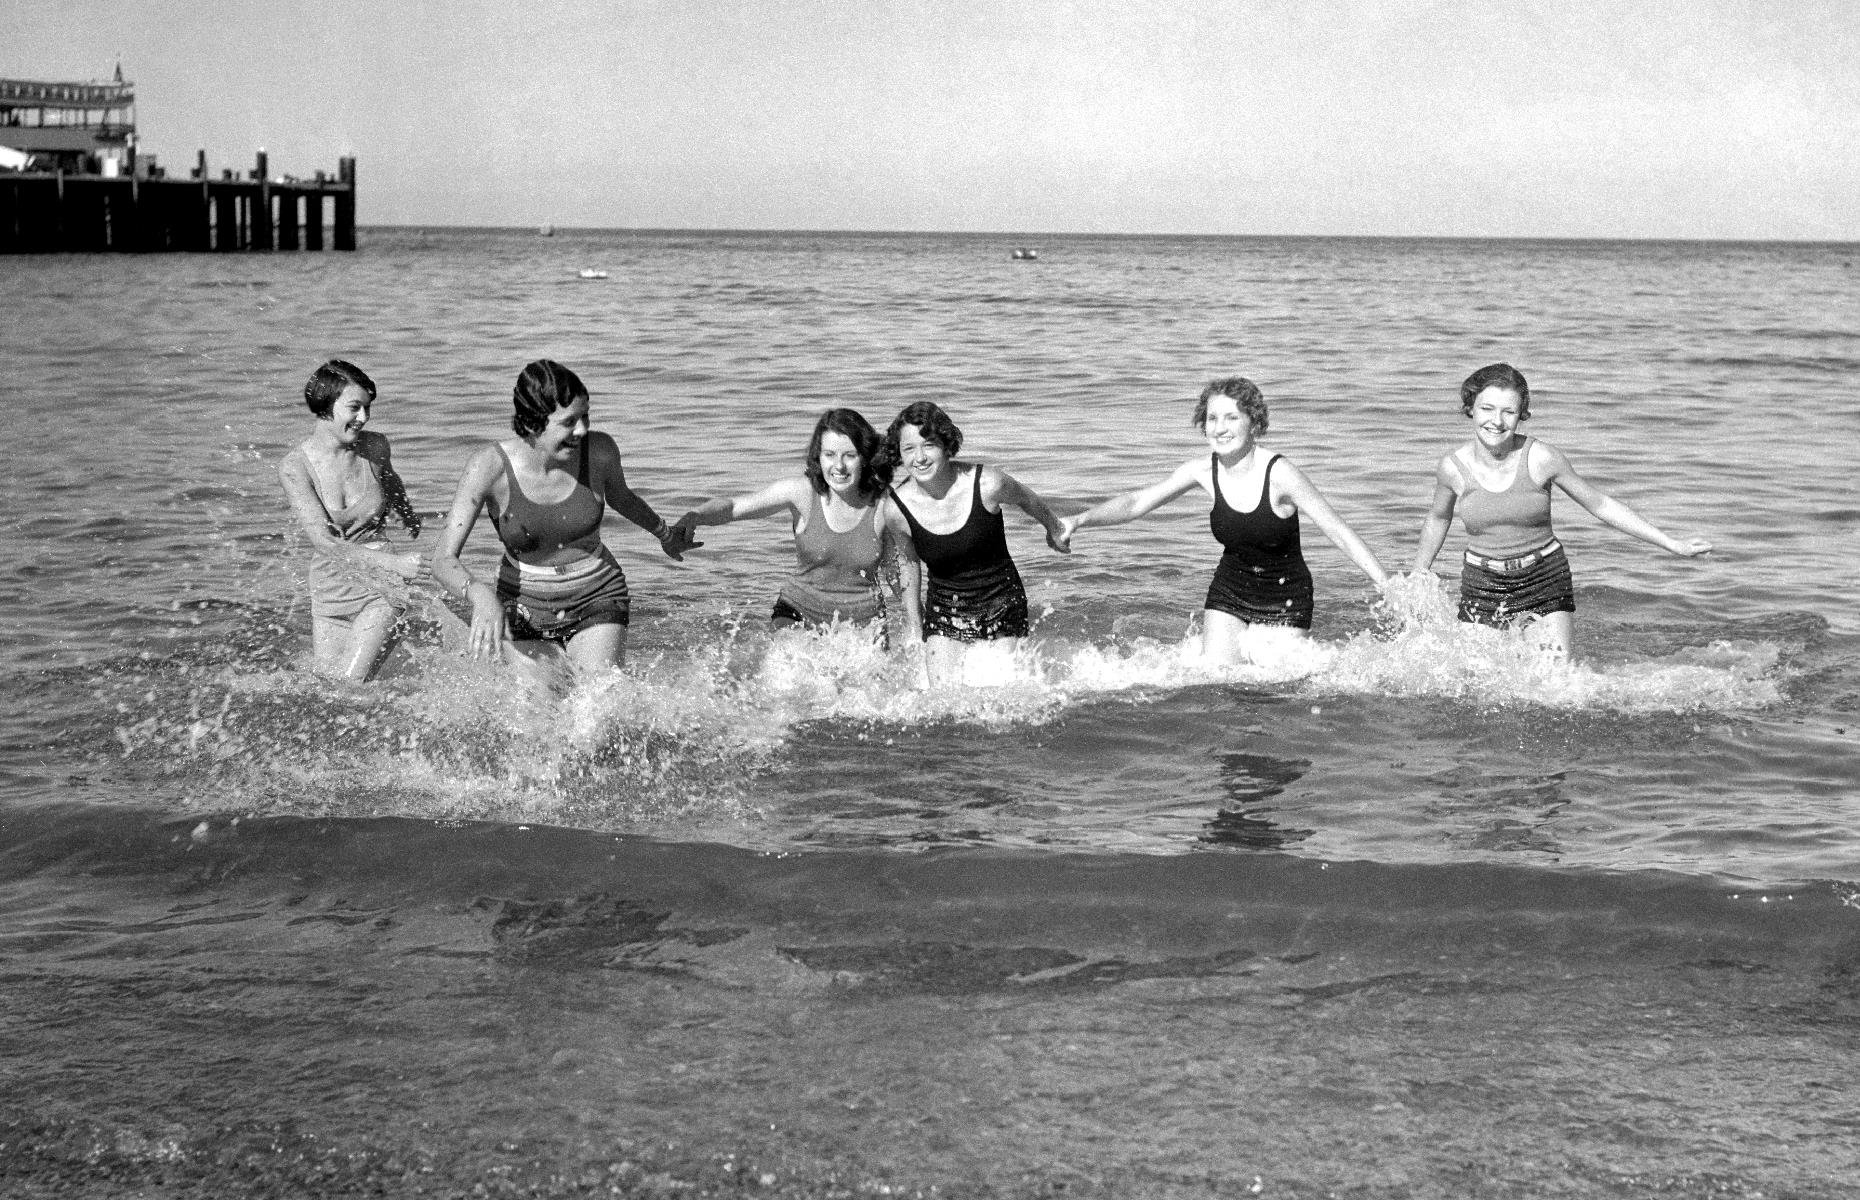 Over on the west coast, the Golden State pulled in its fair share of vacationers too. Spots such as Santa Catalina Island, a sun-drenched isle off the Southern California coast, attracted holidaymakers in search of a seaside getaway. A group of young women are snapped here as they paddle in the Pacific Ocean during a 1932 trip to the island.